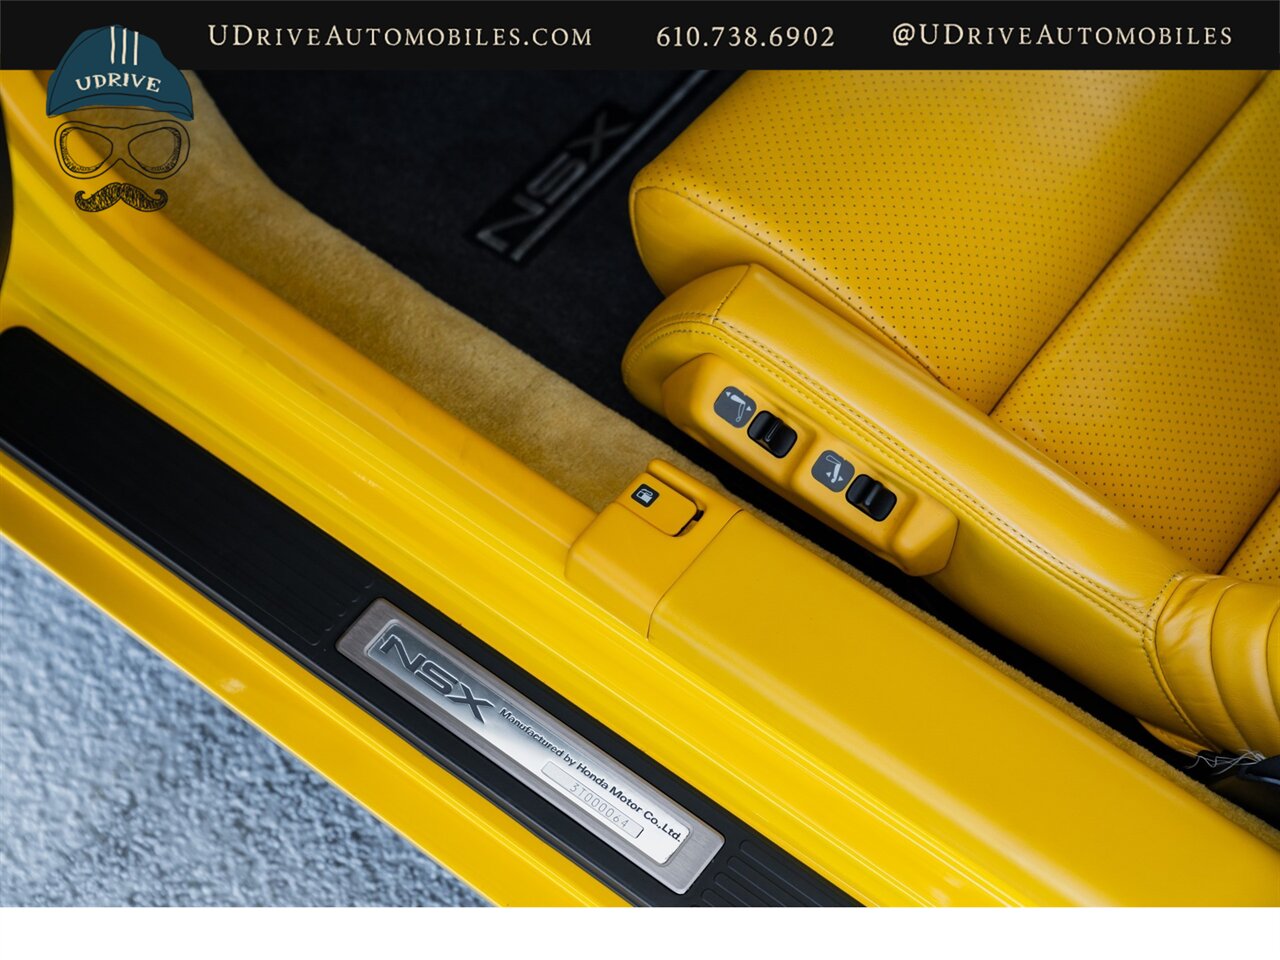 2003 Acura NSX NSX-T  Spa Yellow over Yellow Lthr 1 of 13 Produced - Photo 33 - West Chester, PA 19382